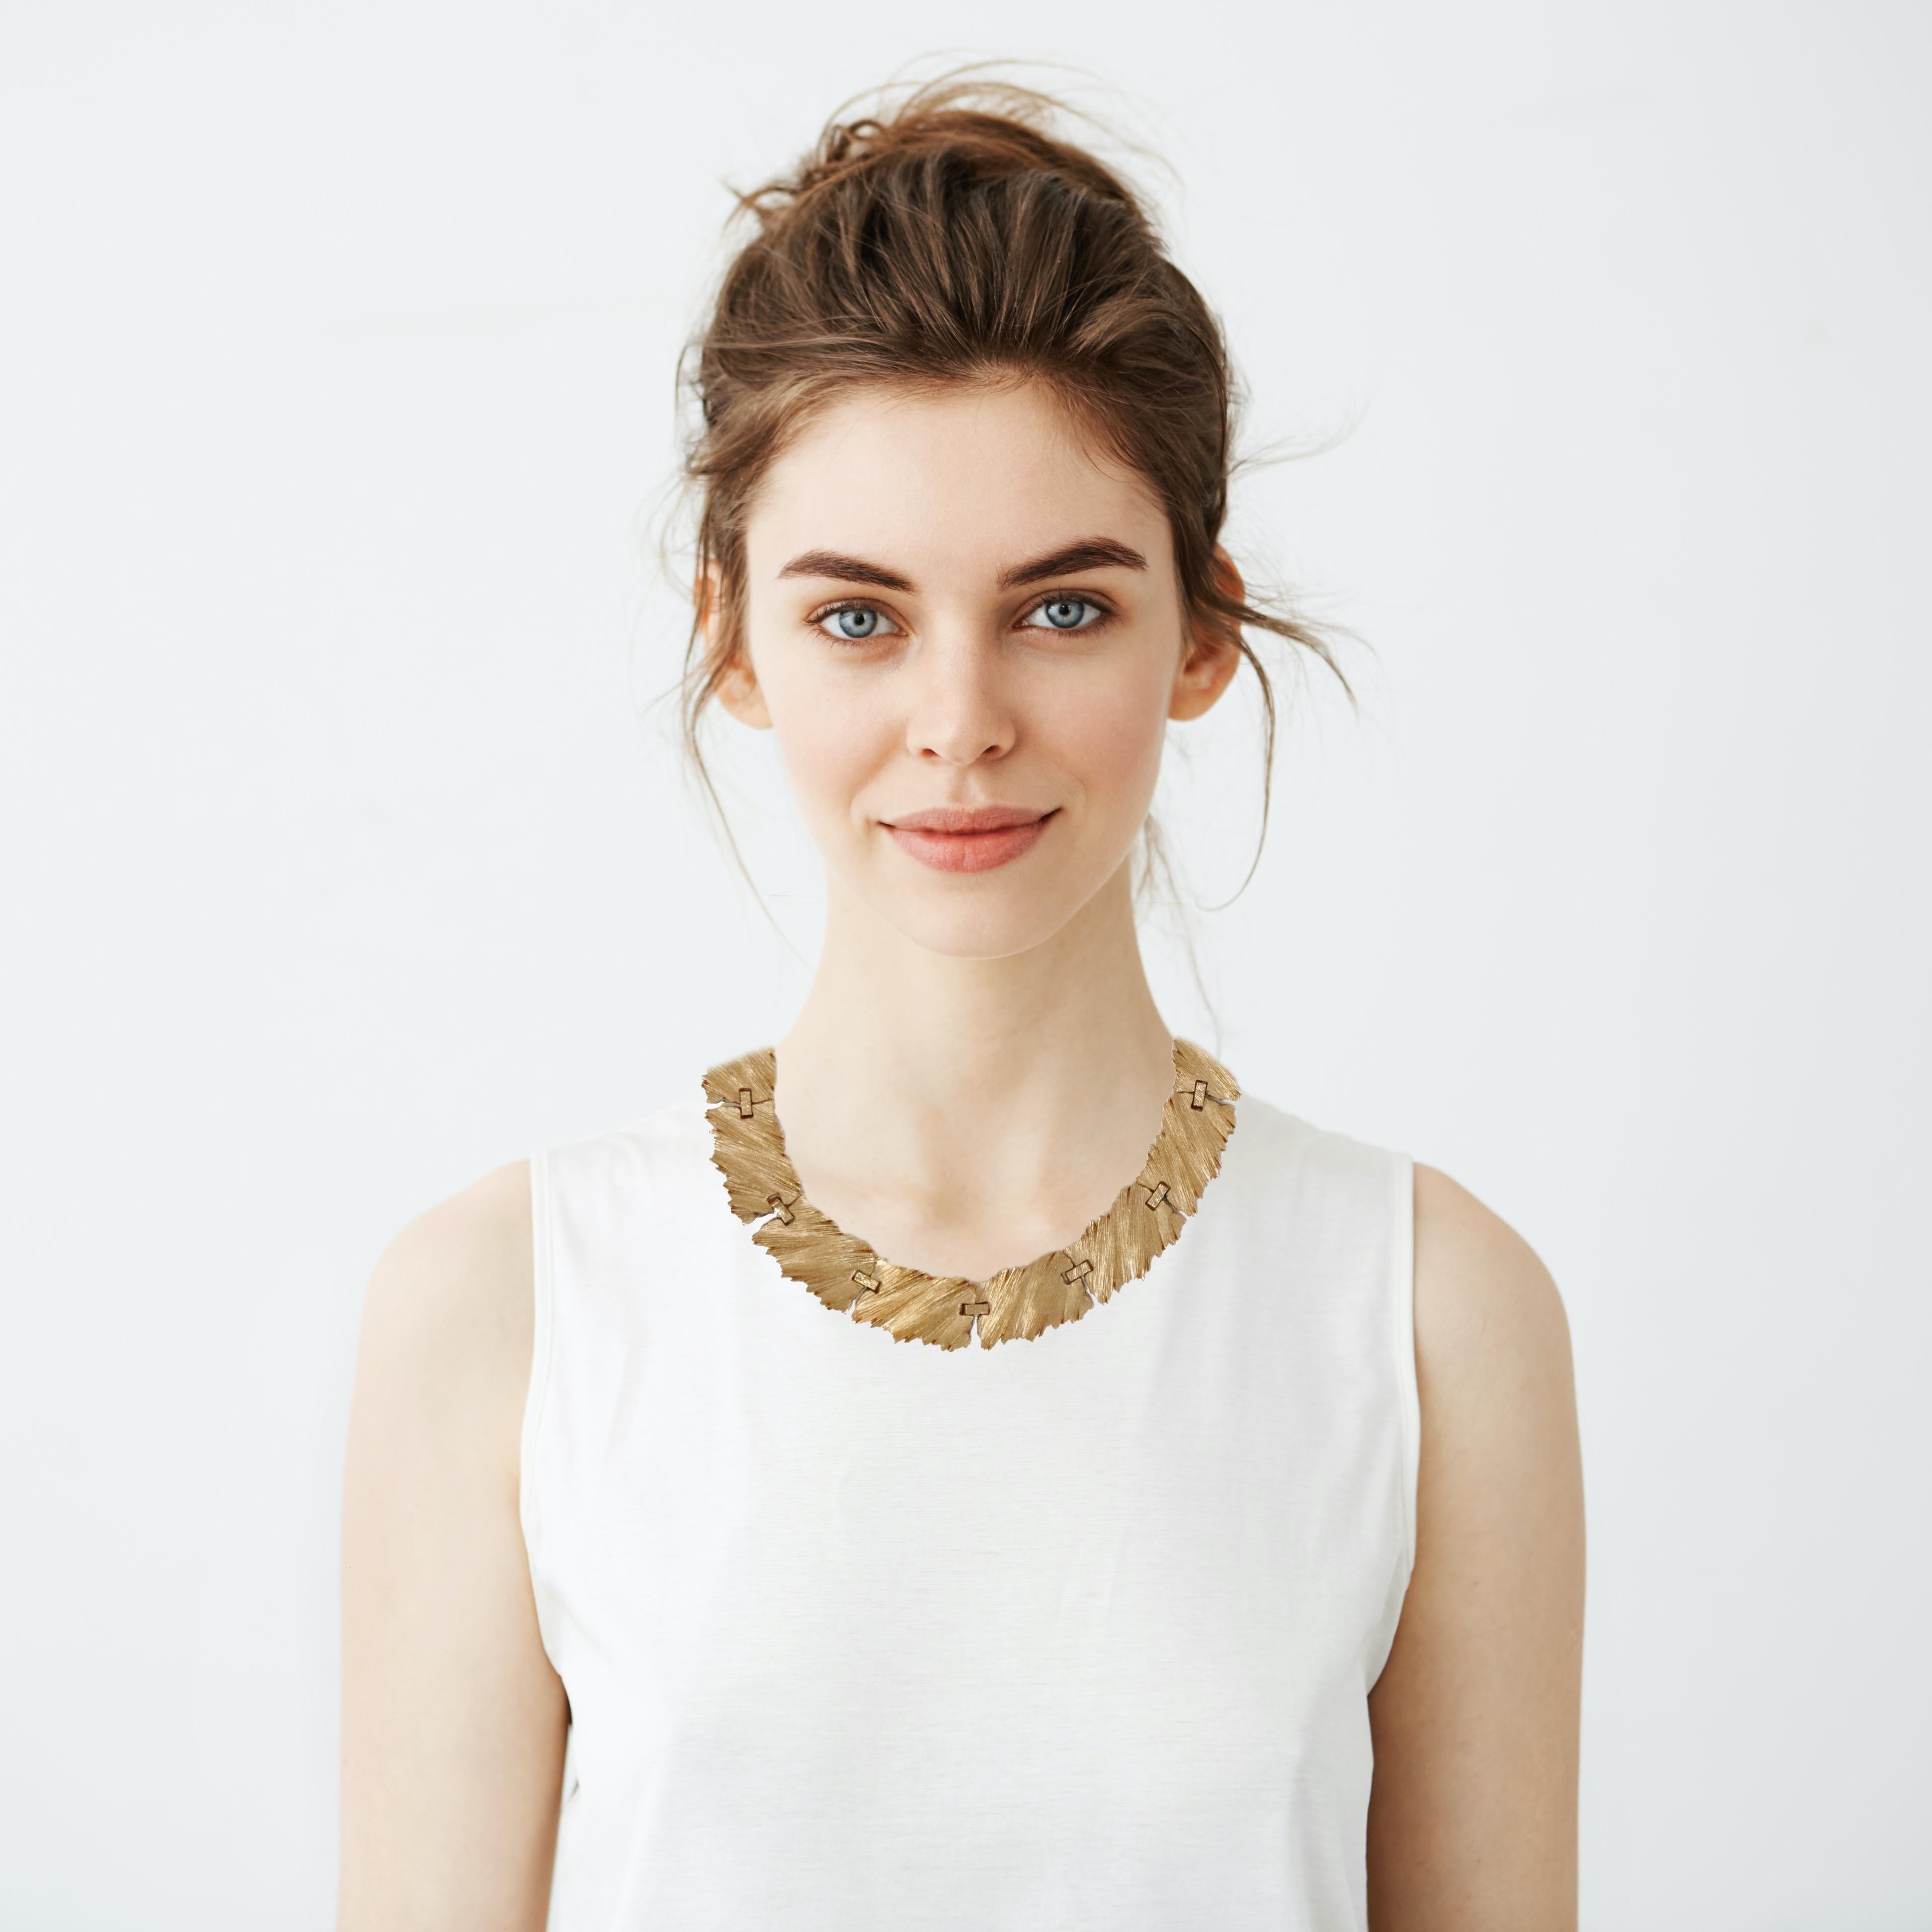 This stunning 1960's Trifari gold-plated Brutalist-style textured panel choker necklace is an amazing statement piece that can be worn alone or layered with other necklaces. Featuring eleven gilded panels, this unique piece is an excellent addition